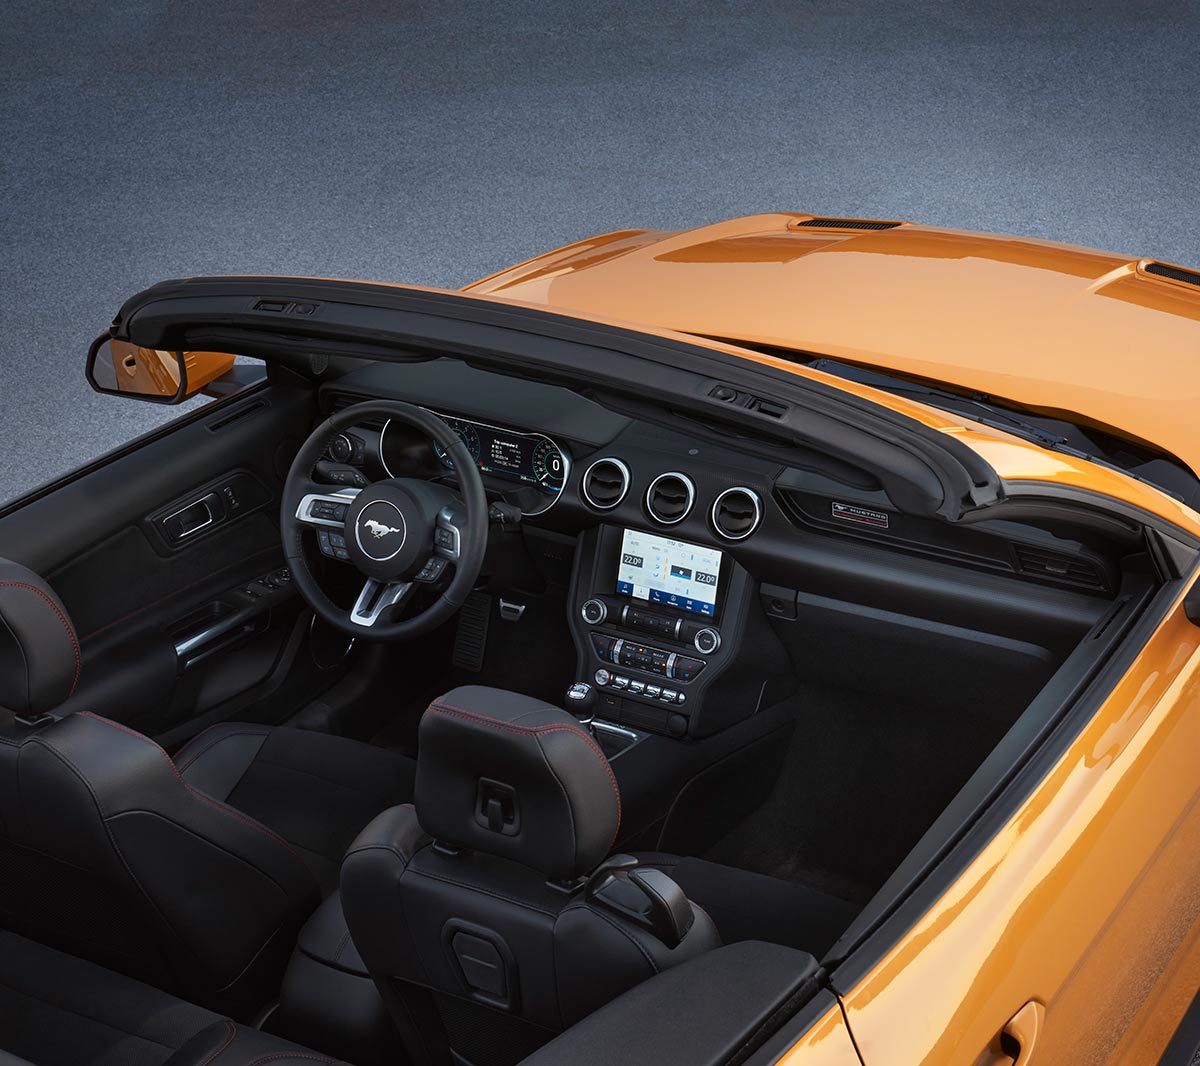 Ford Mustang California Edition photo showing the interior from above